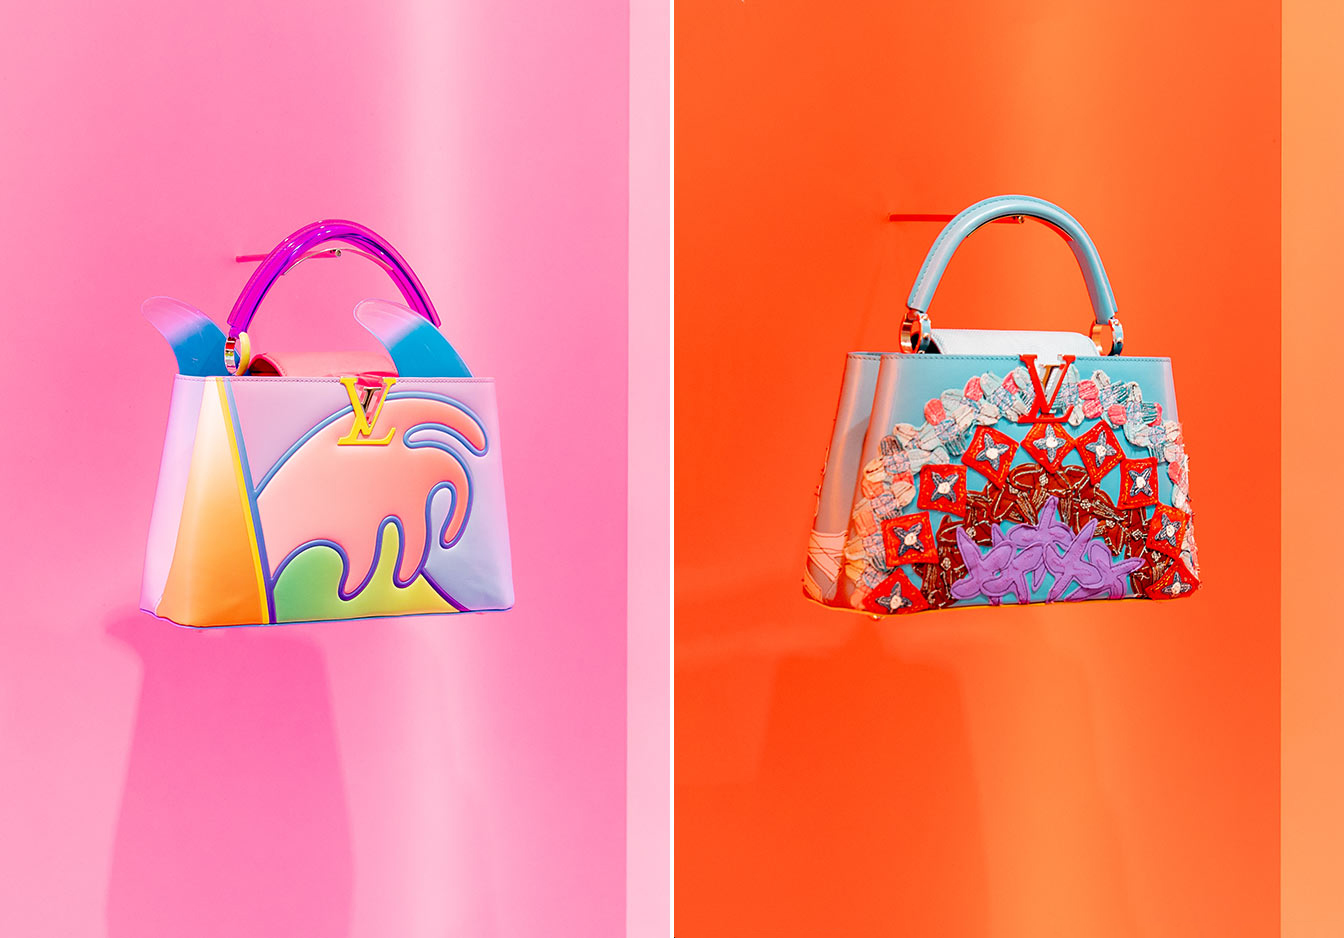 Meet The Artists Entering The Fray For Louis Vuitton's Artycapucines